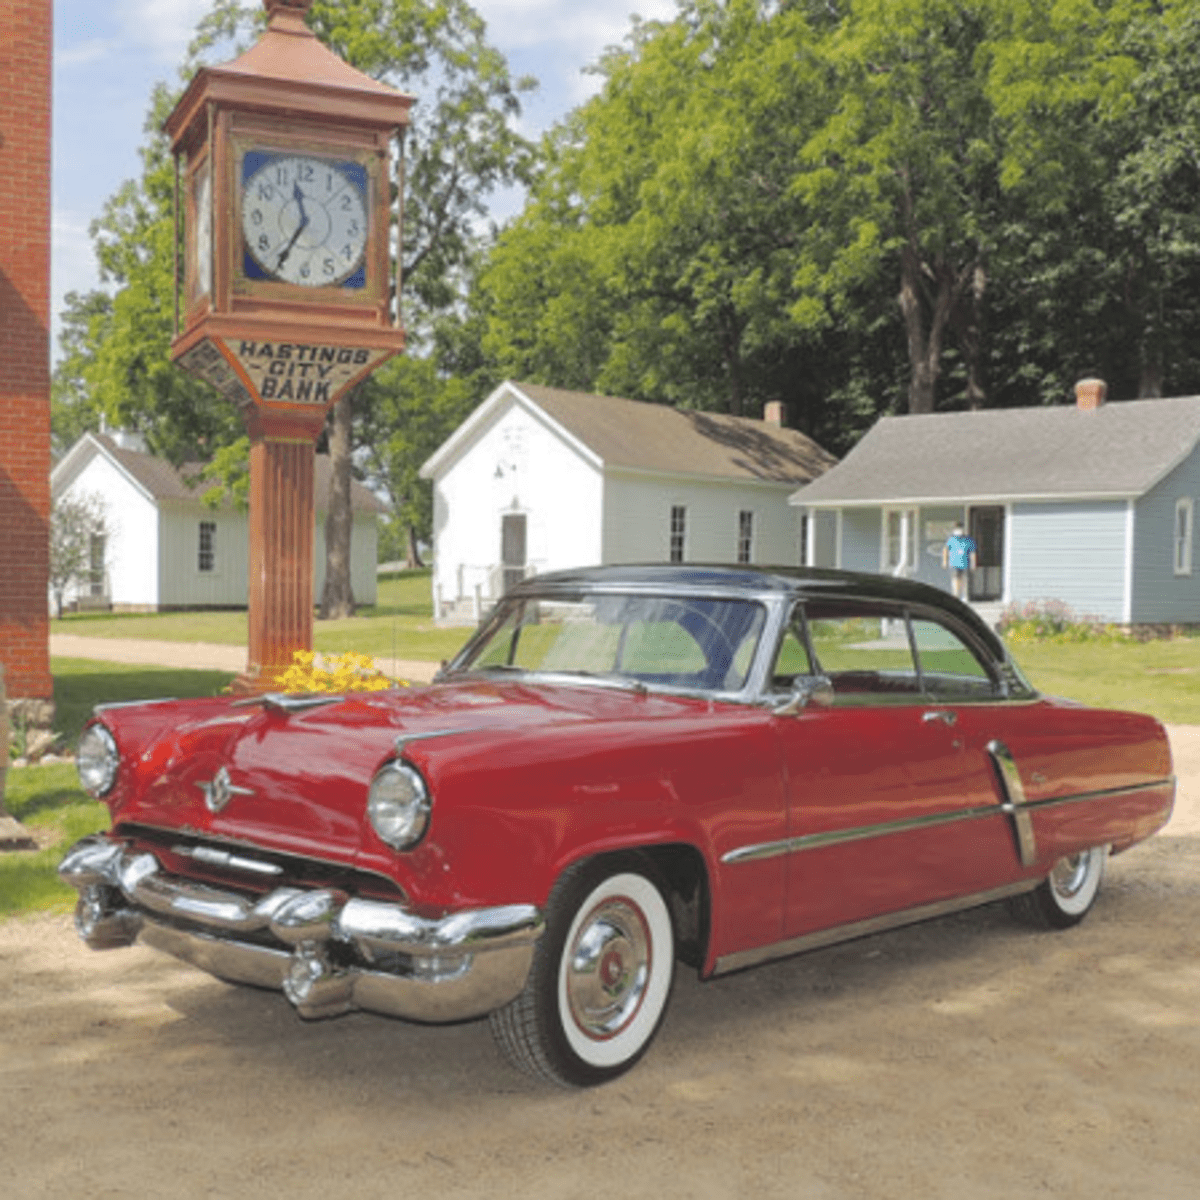 Car of the Week: 1952 Lincoln Capri - Old Cars Weekly